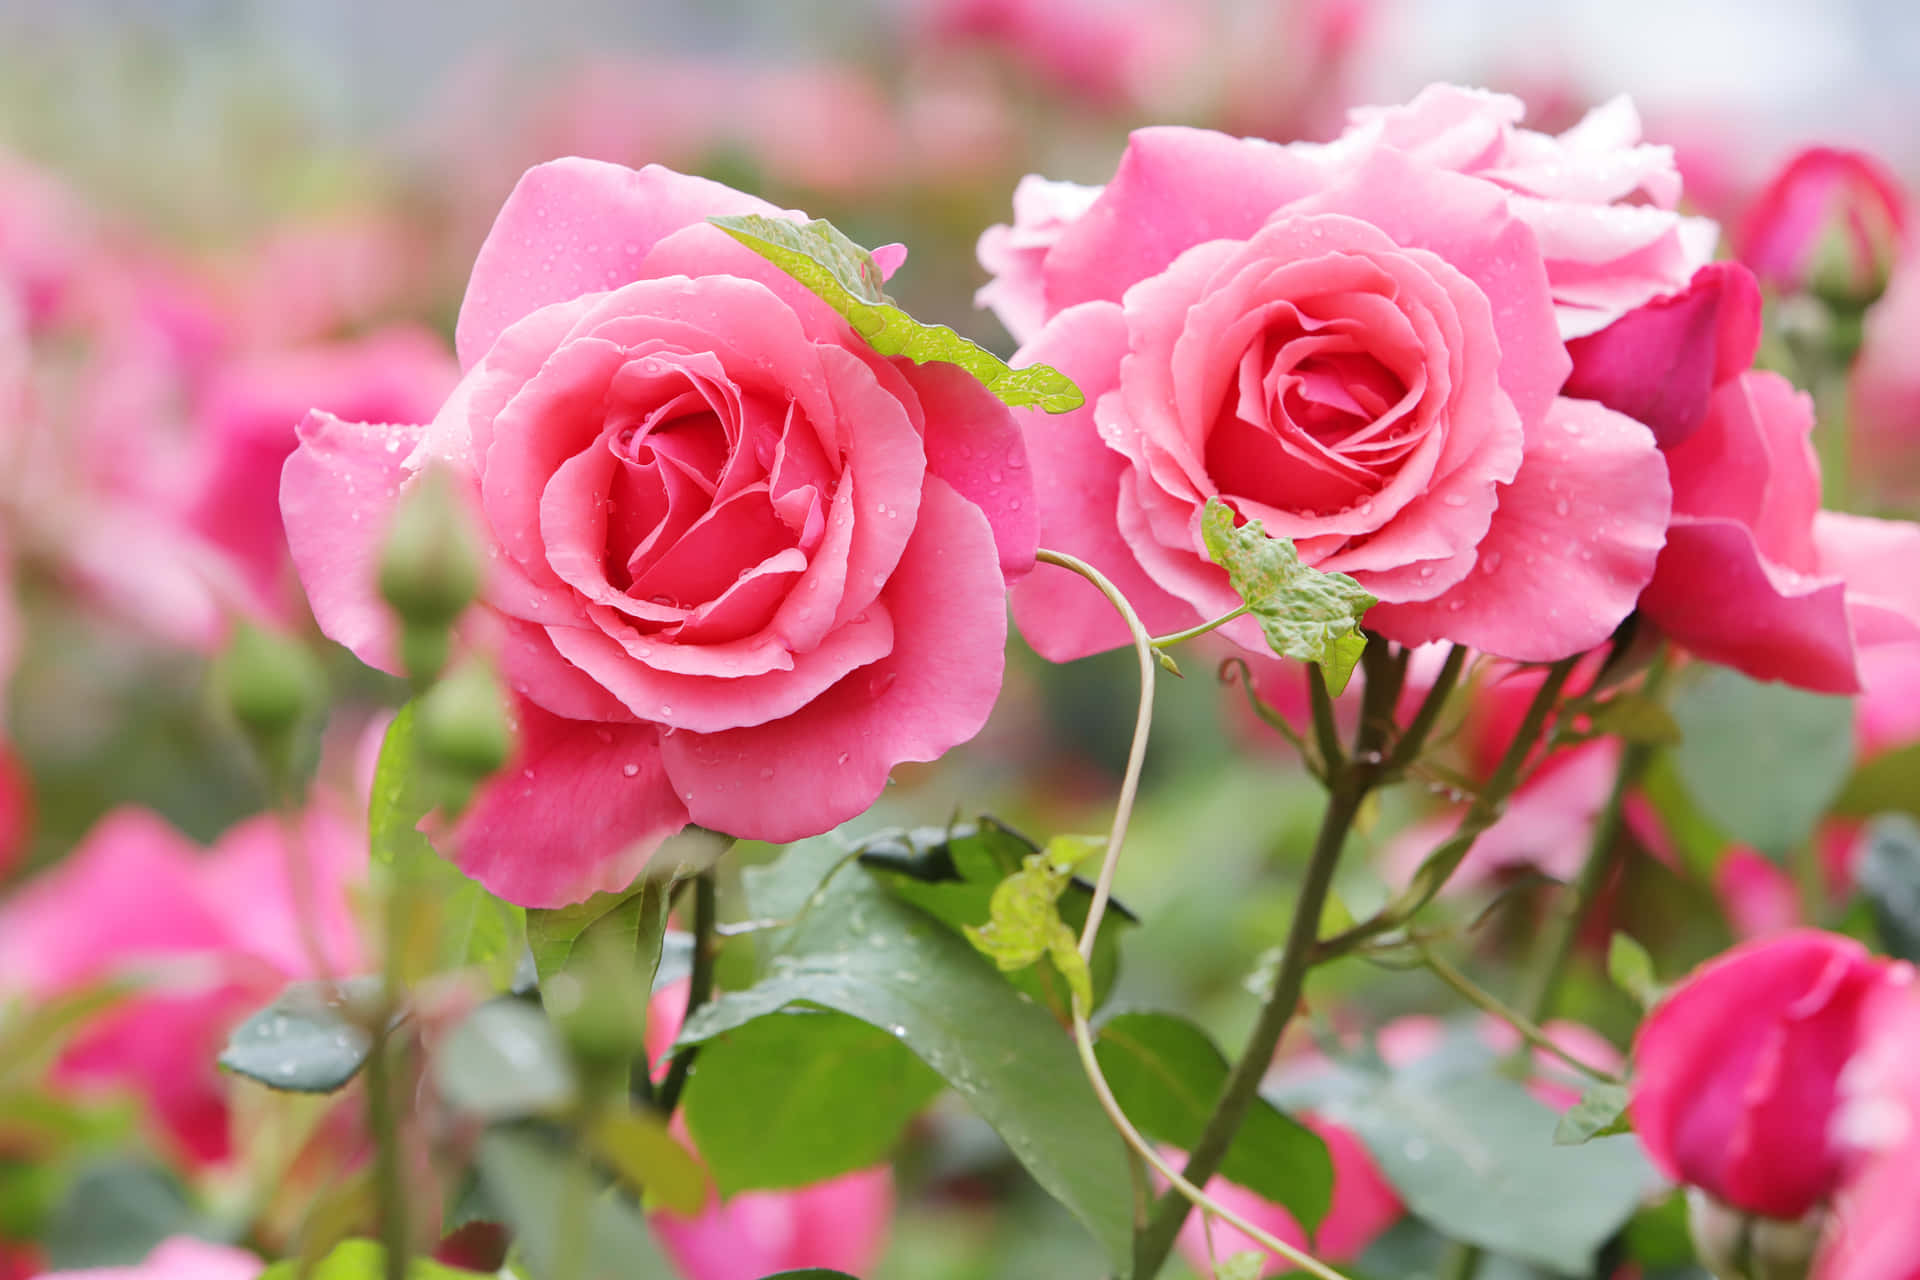 pink roses in a garden with green leaves Wallpaper